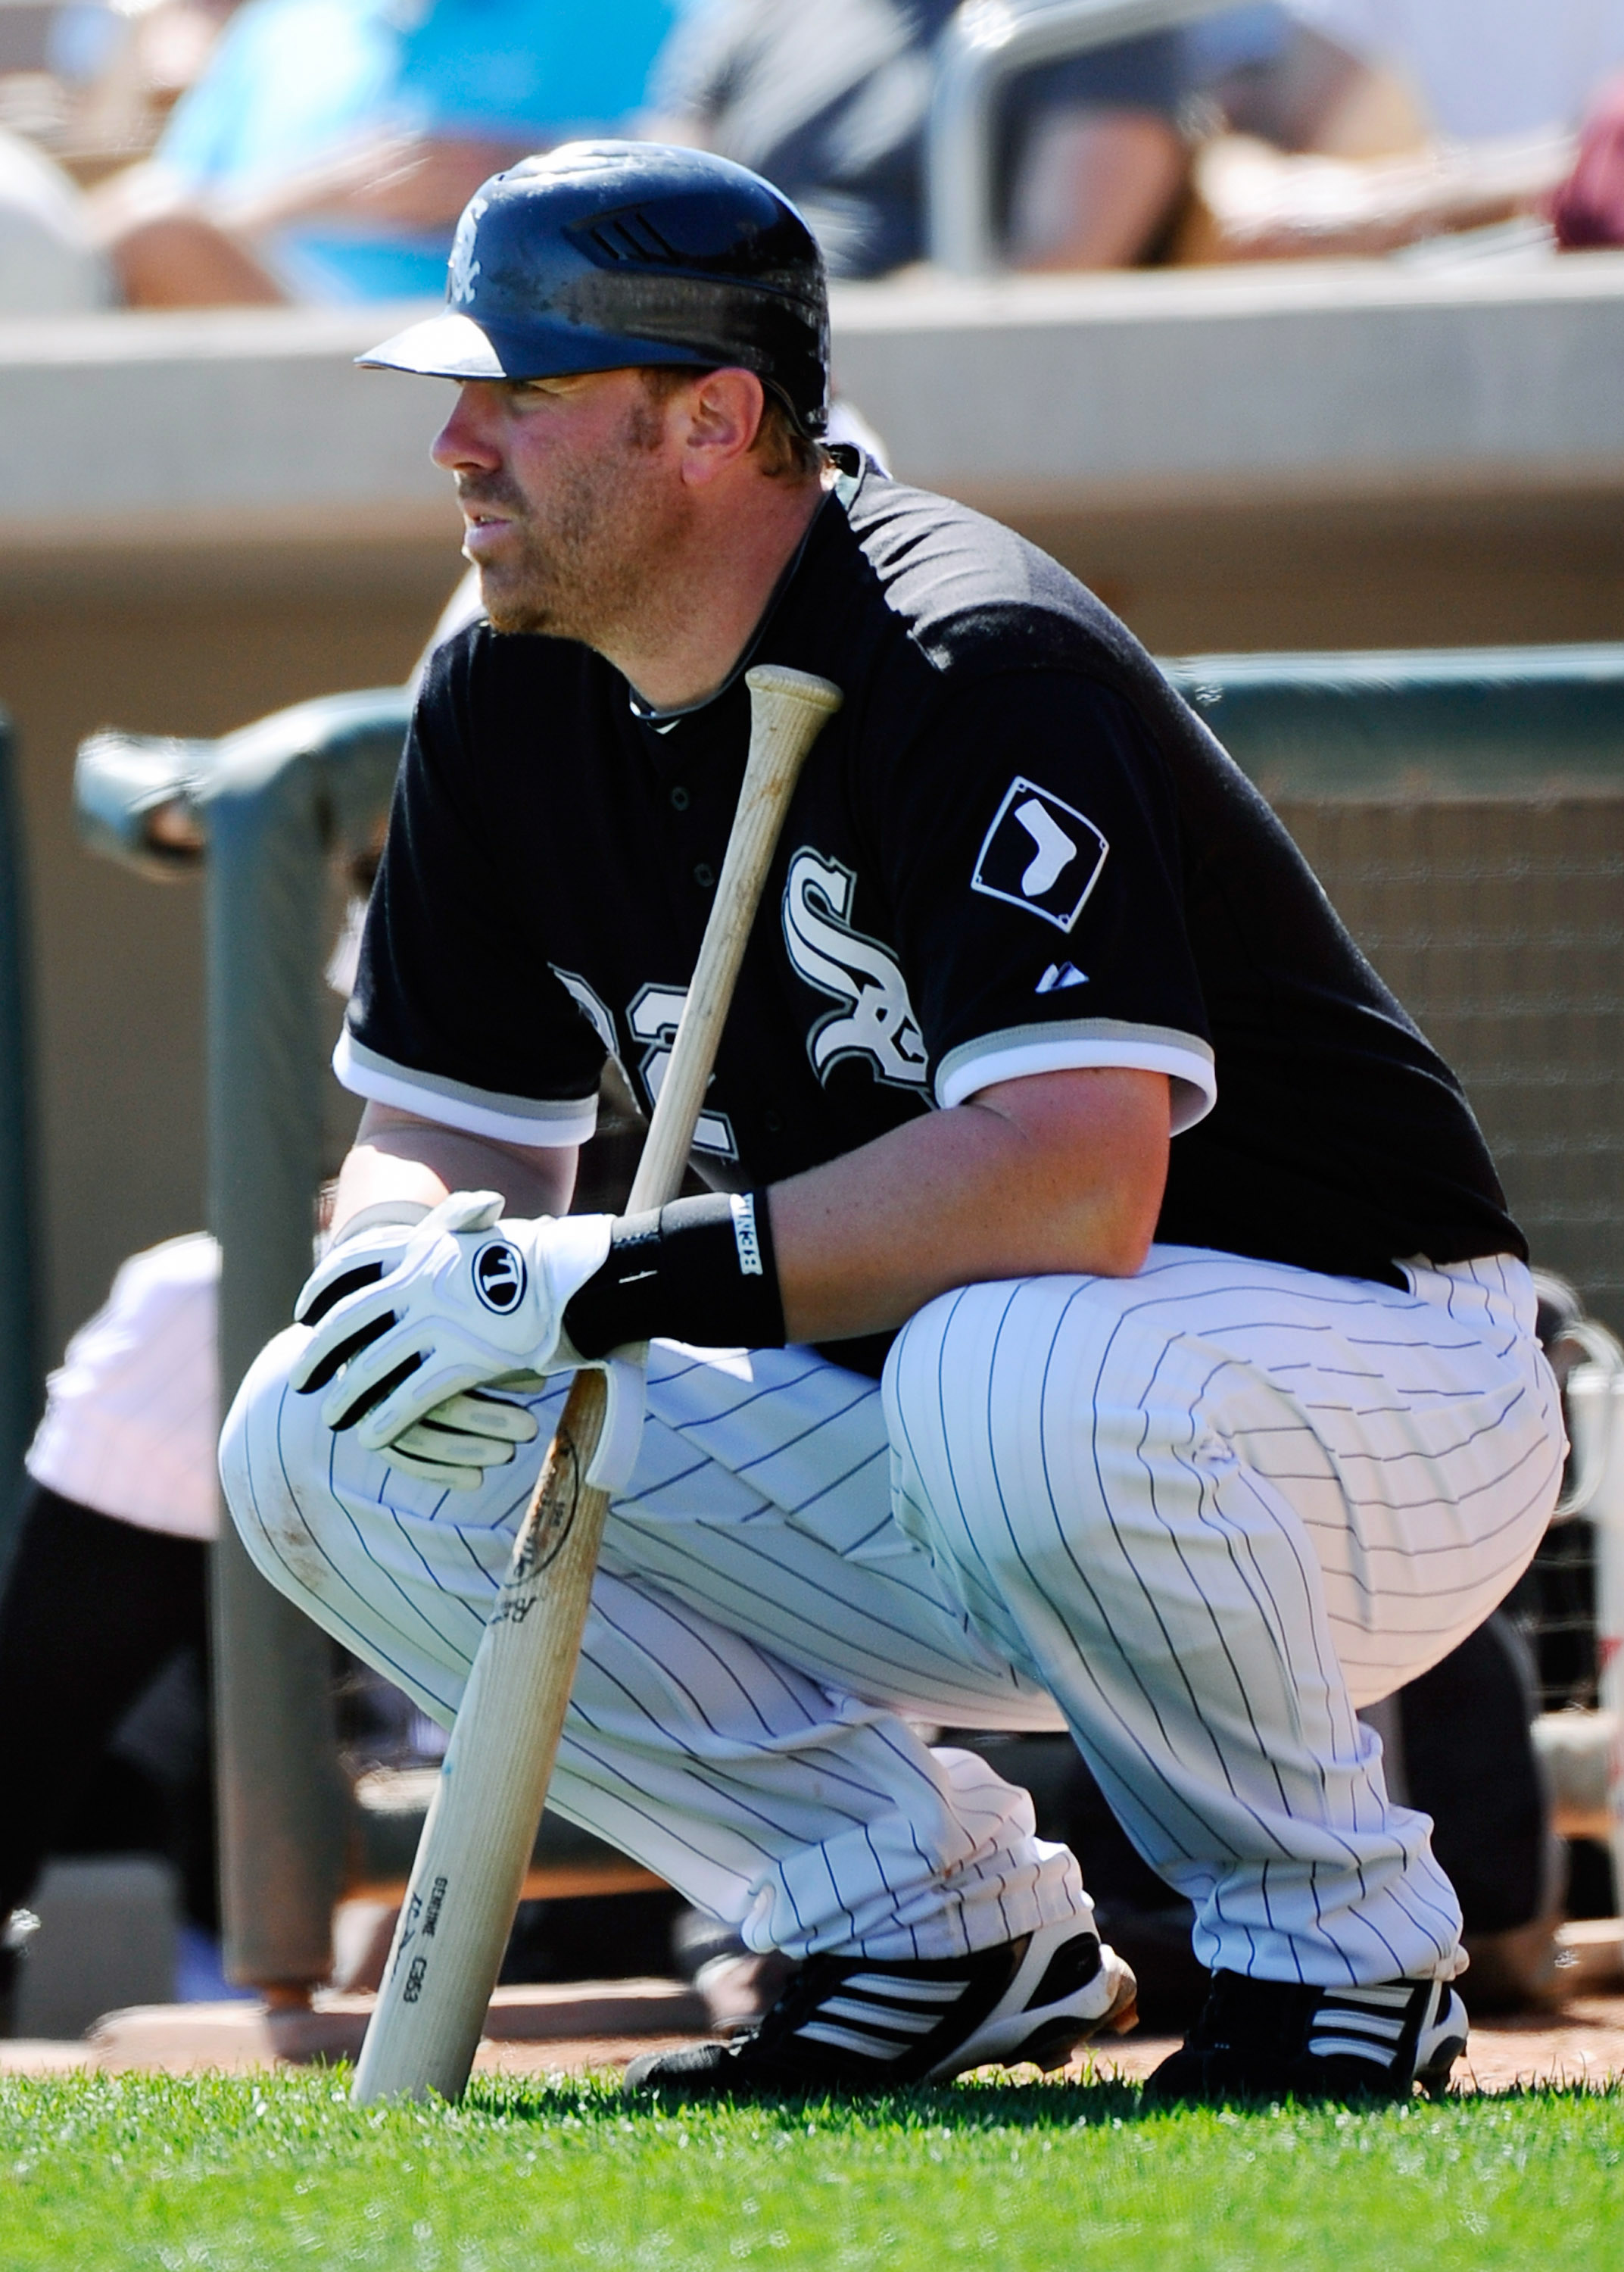 GLENDALE, AZ - MARCH 11:  Adam Dunn #32 of the Chicago White Sox during the spring training baseball game against Chicago Cubs at Camelback Ranch on March 11, 2011 in Glendale, Arizona.  (Photo by Kevork Djansezian/Getty Images)